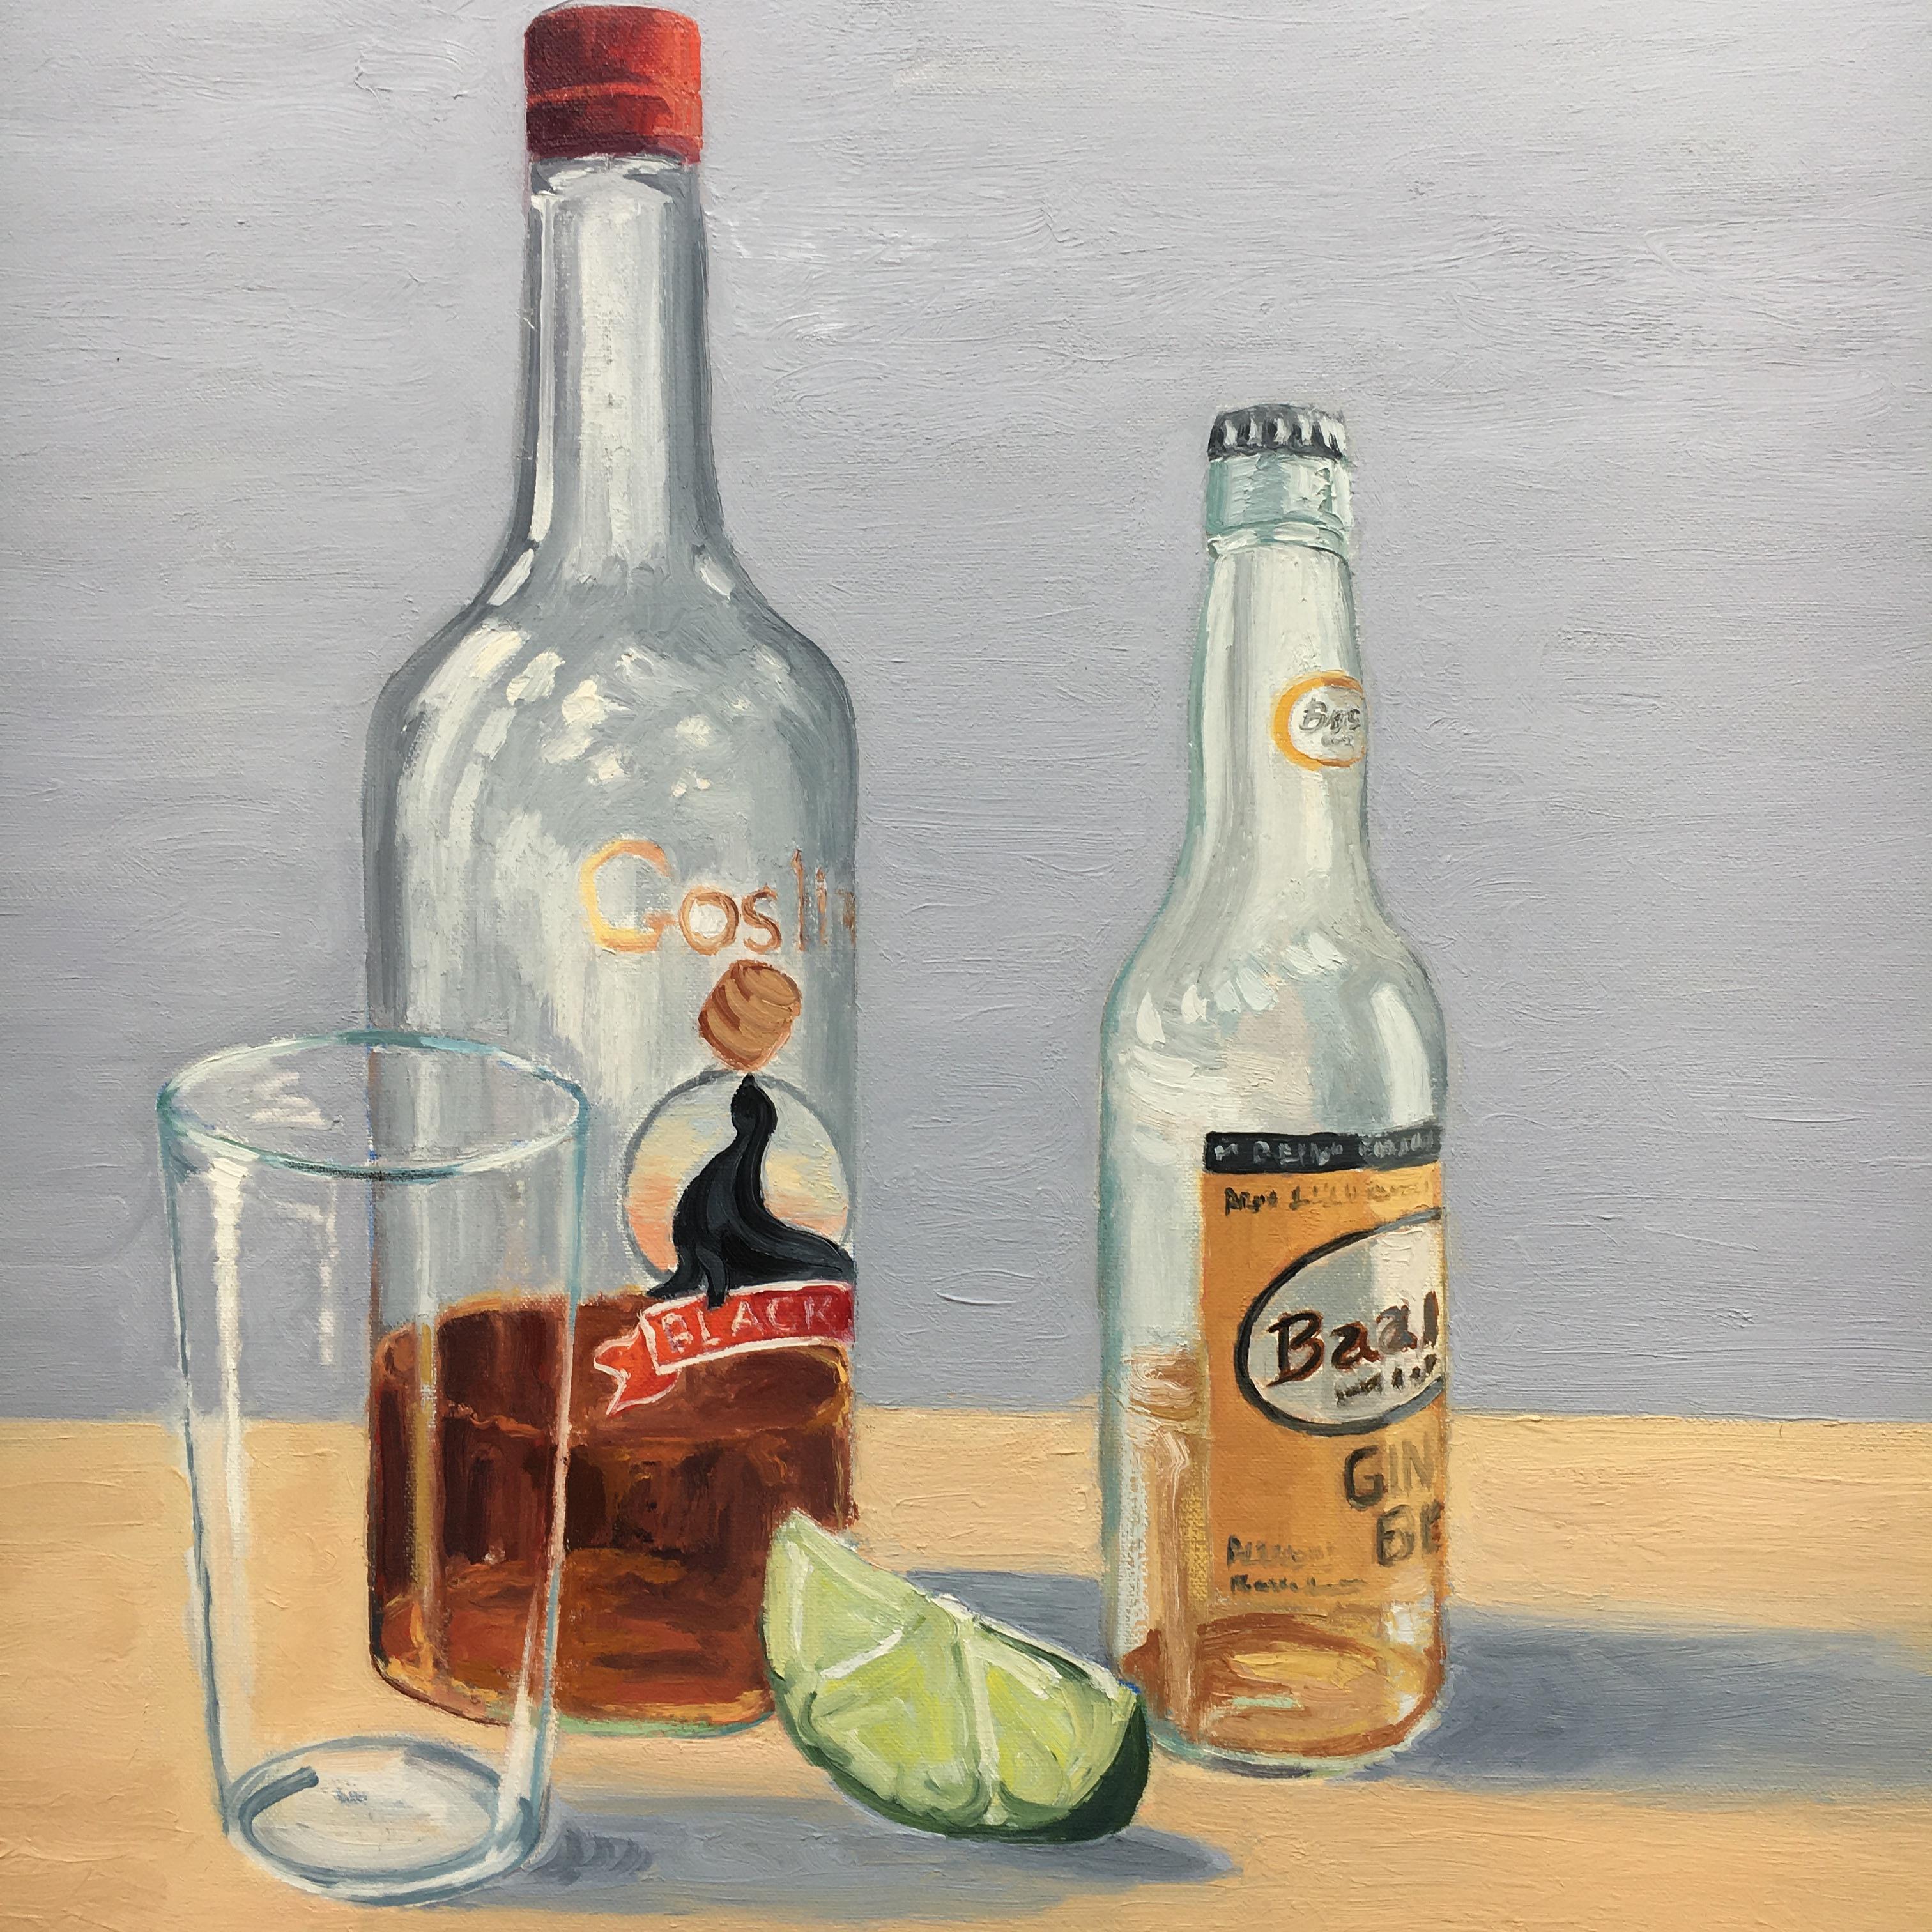 Rum Liquor Bottle with Beer Bottle, Glass, and Lime. Title - Dark and Stormy - Painting by Carl Scorza